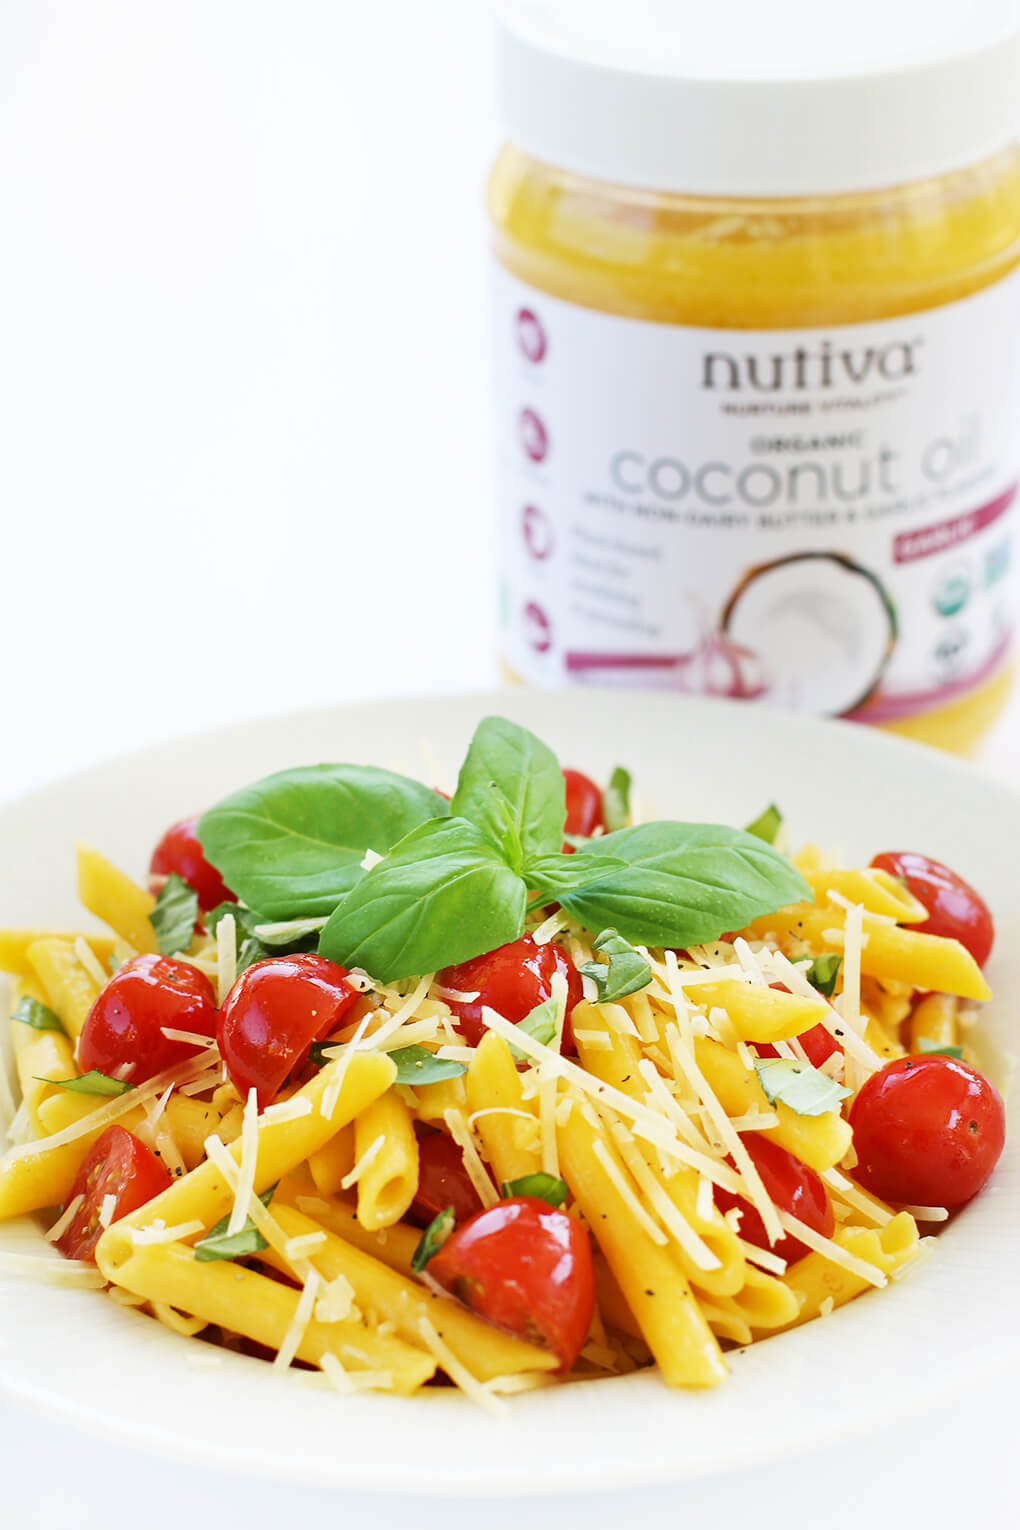 Gluten Free Recipe Roundup Six sarahkayhoffman.com Fresh Tomato Basil Penne Pasta Nutiva Nutiva Organic Buttery Coconut Oil with Non-Dairy Butter and Garlic Flavors